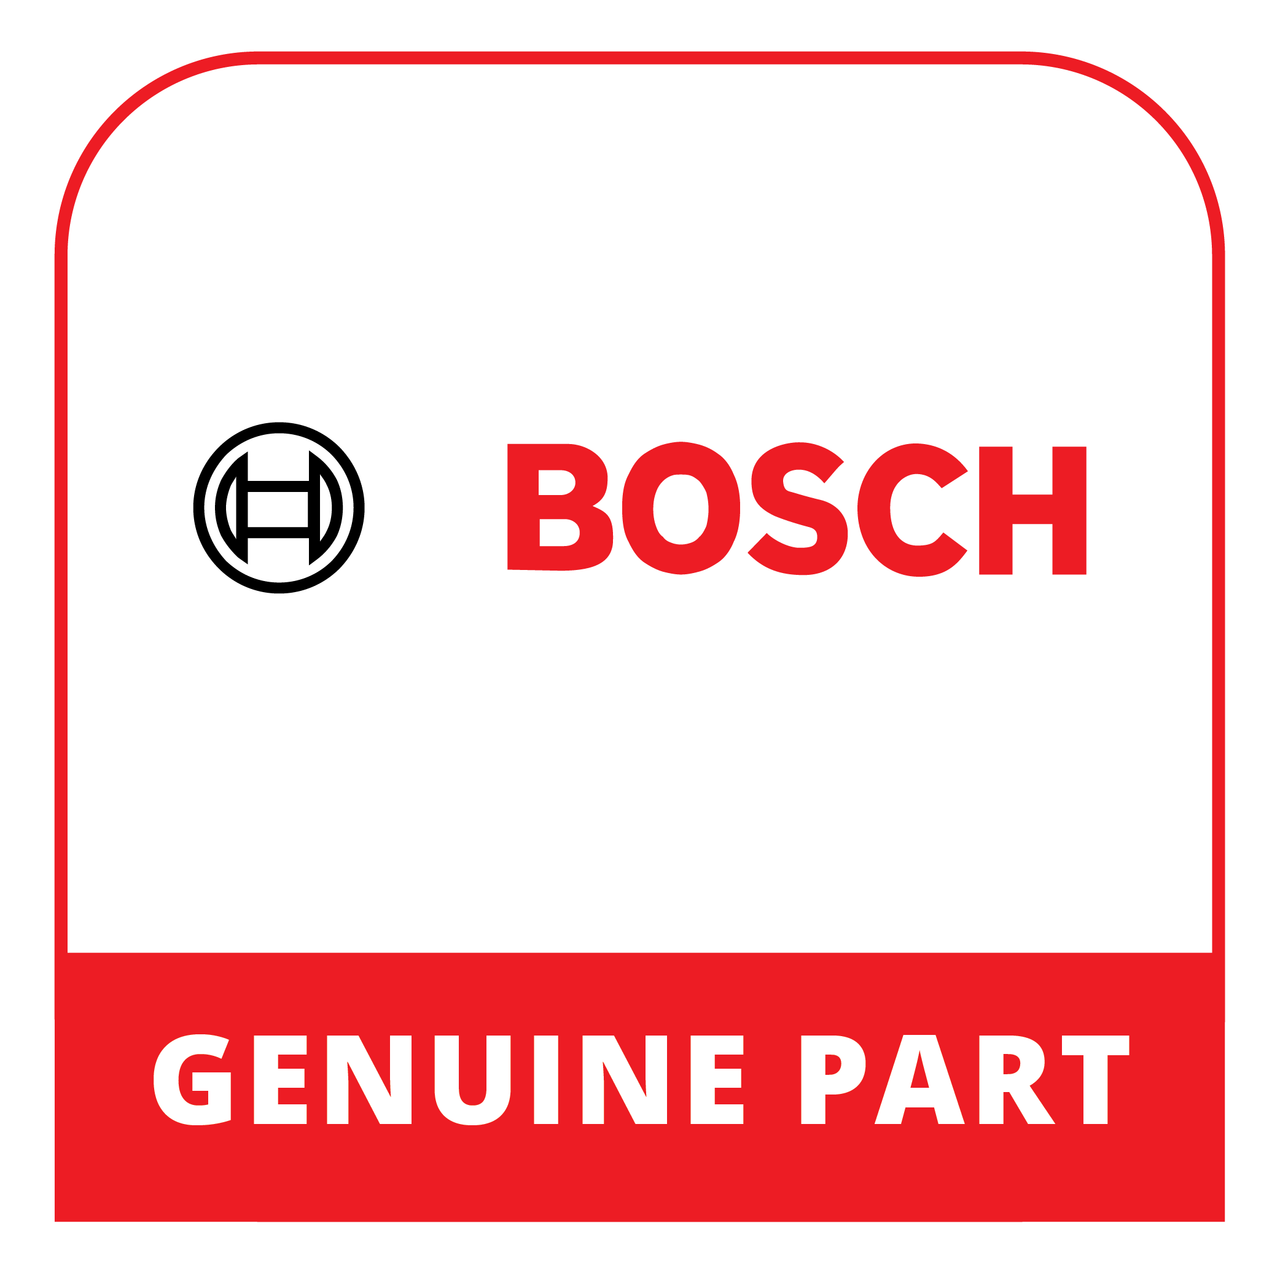 Bosch (Thermador) 10014236 - Gas Tap - Genuine Bosch (Thermador) Part